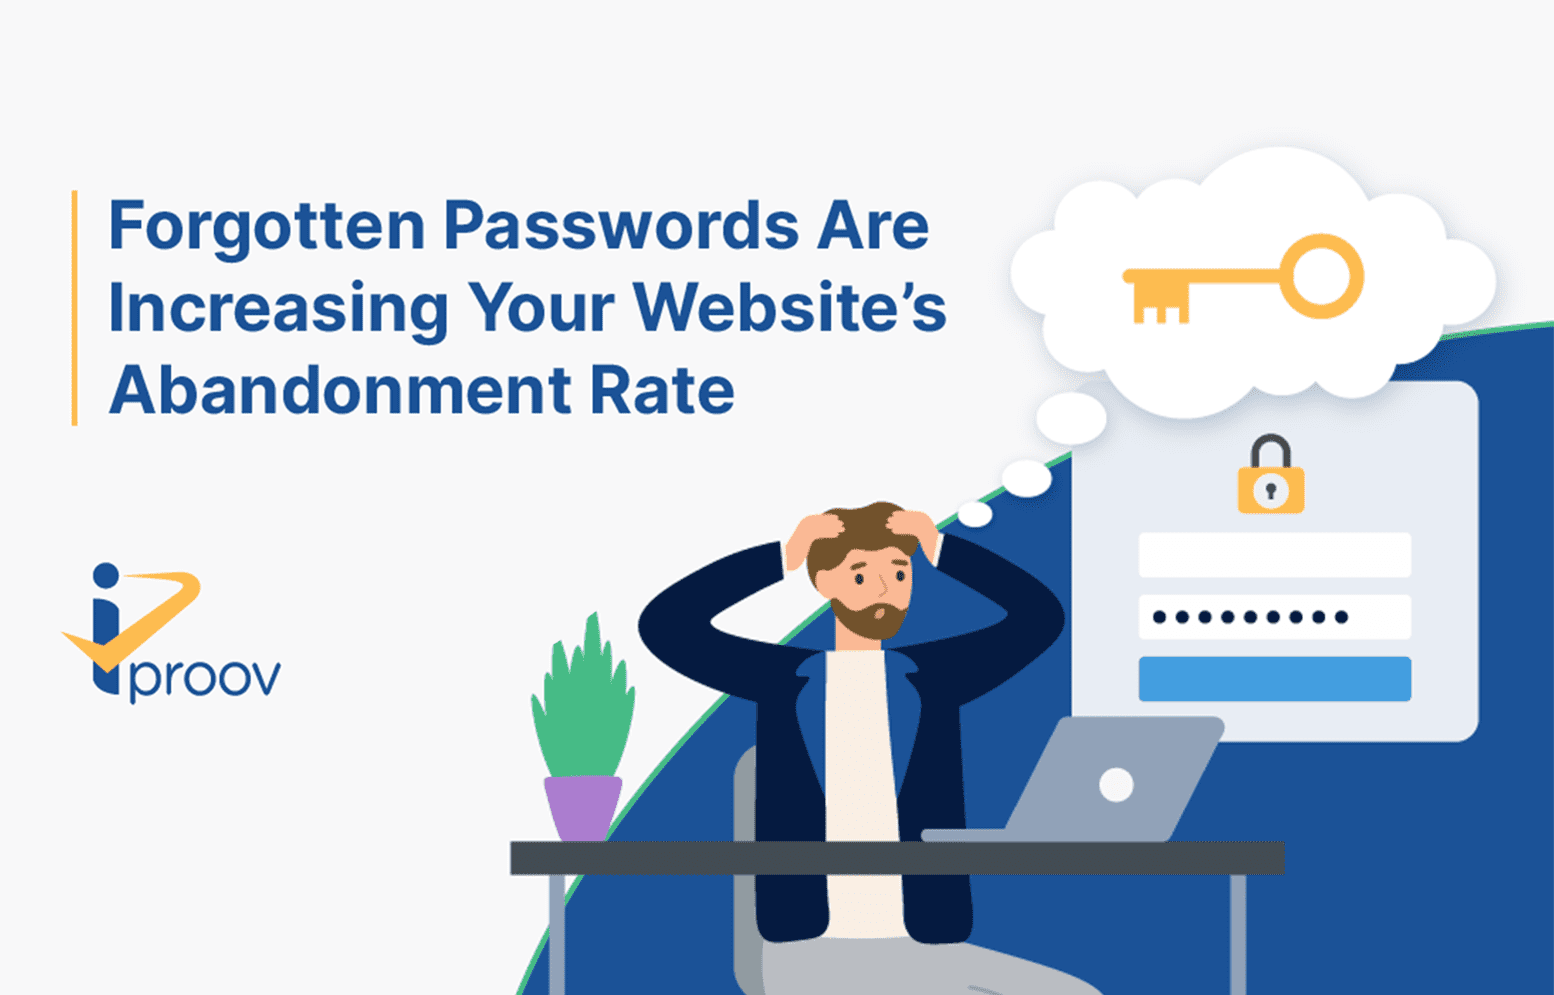 Disadvantages of passwords - they're increasing your website abandonment rate